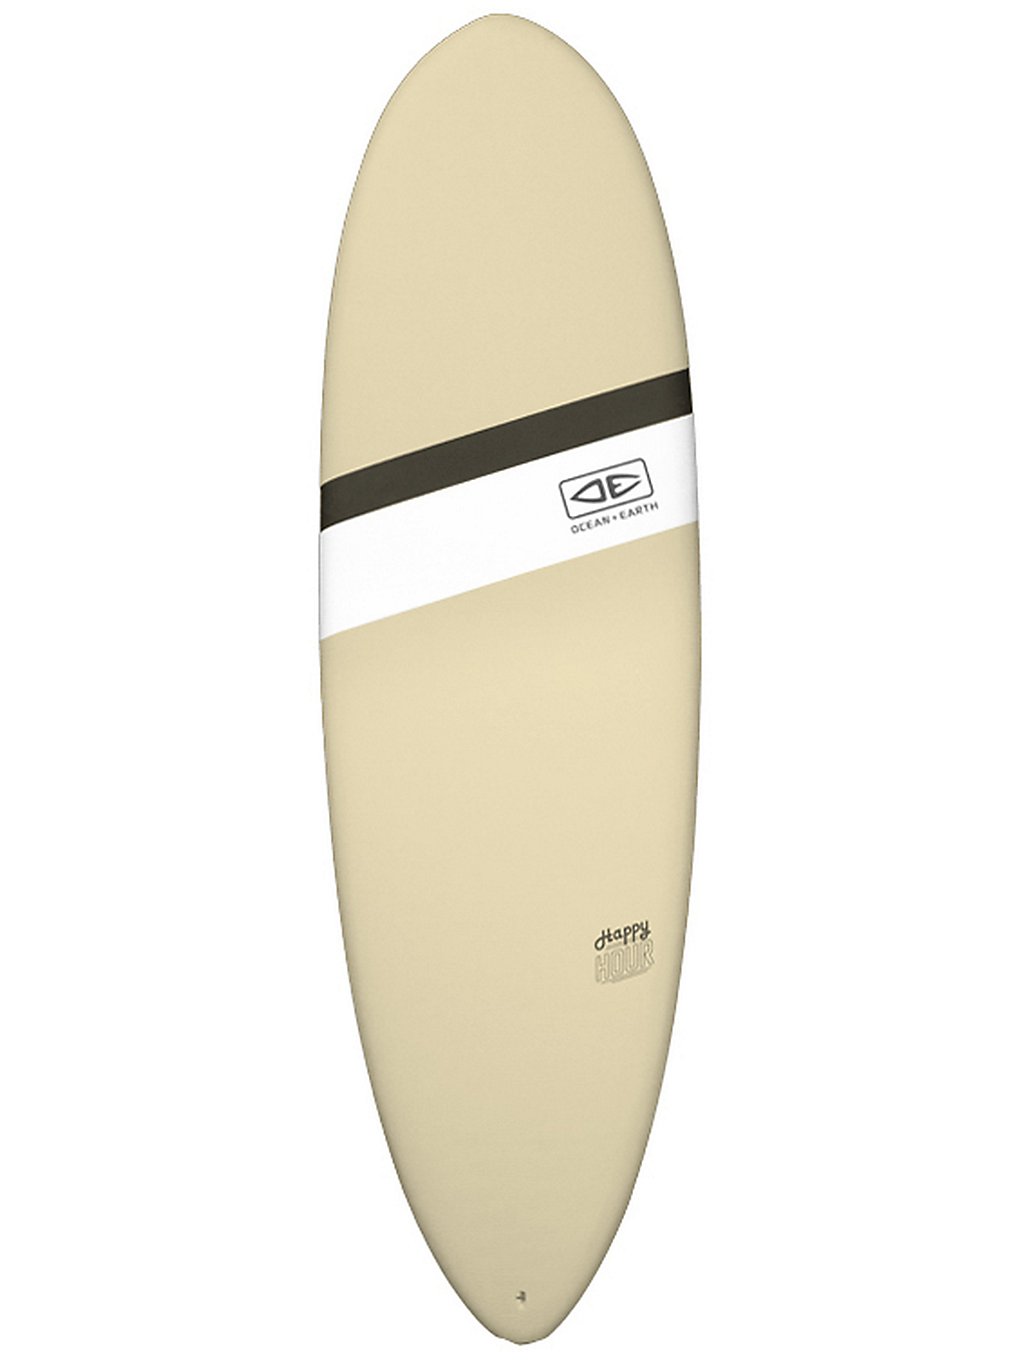 Ocean & Earth Happy Hour Epoxy Soft 43L 6'6 Surfboard sand